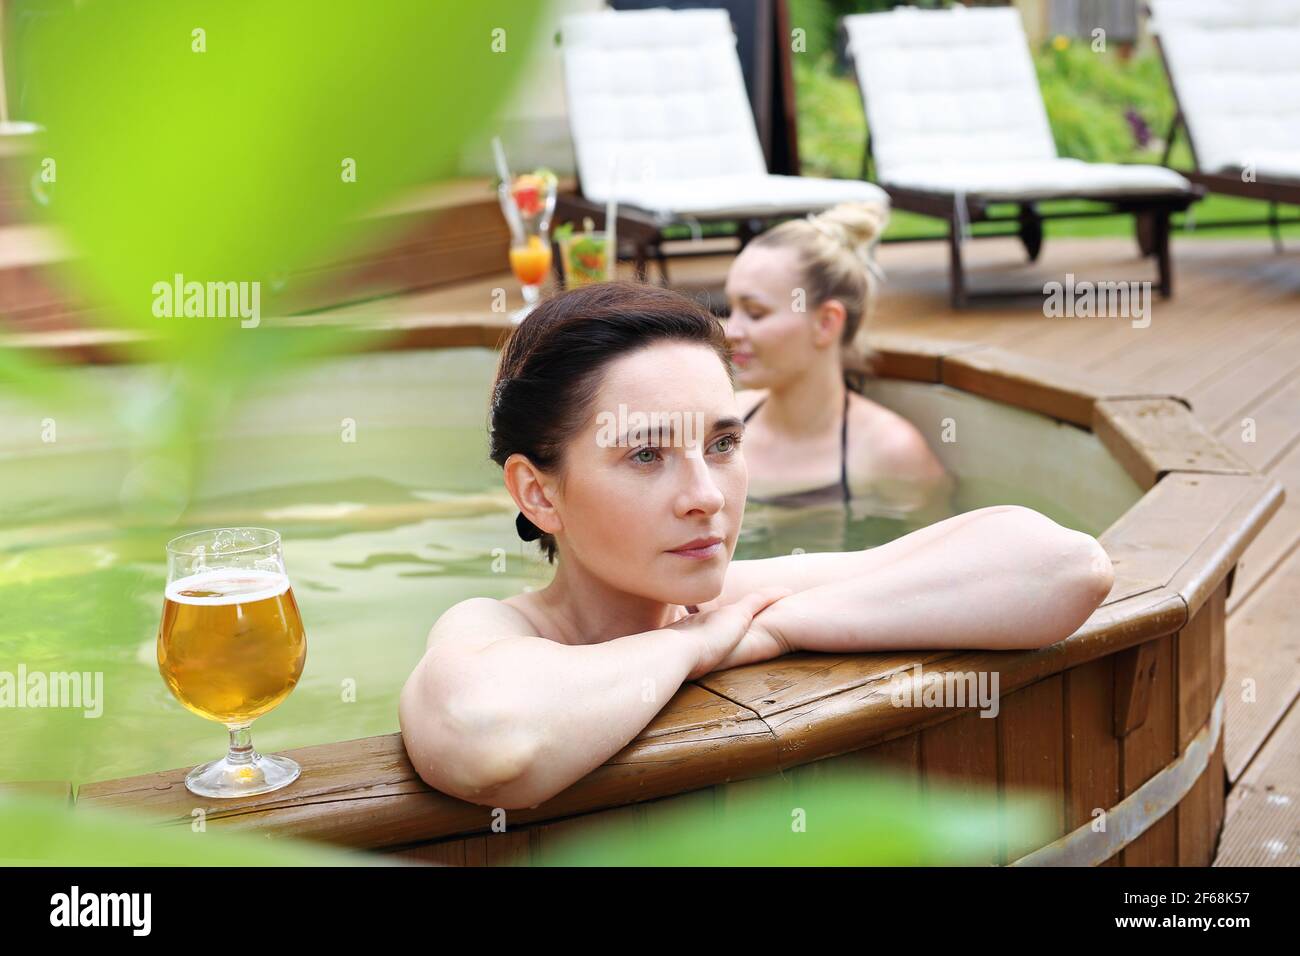 Bathing in a spa tub. Two beautiful women enjoy a relaxing bath in the tub. Girl friends at the spa. Stock Photo